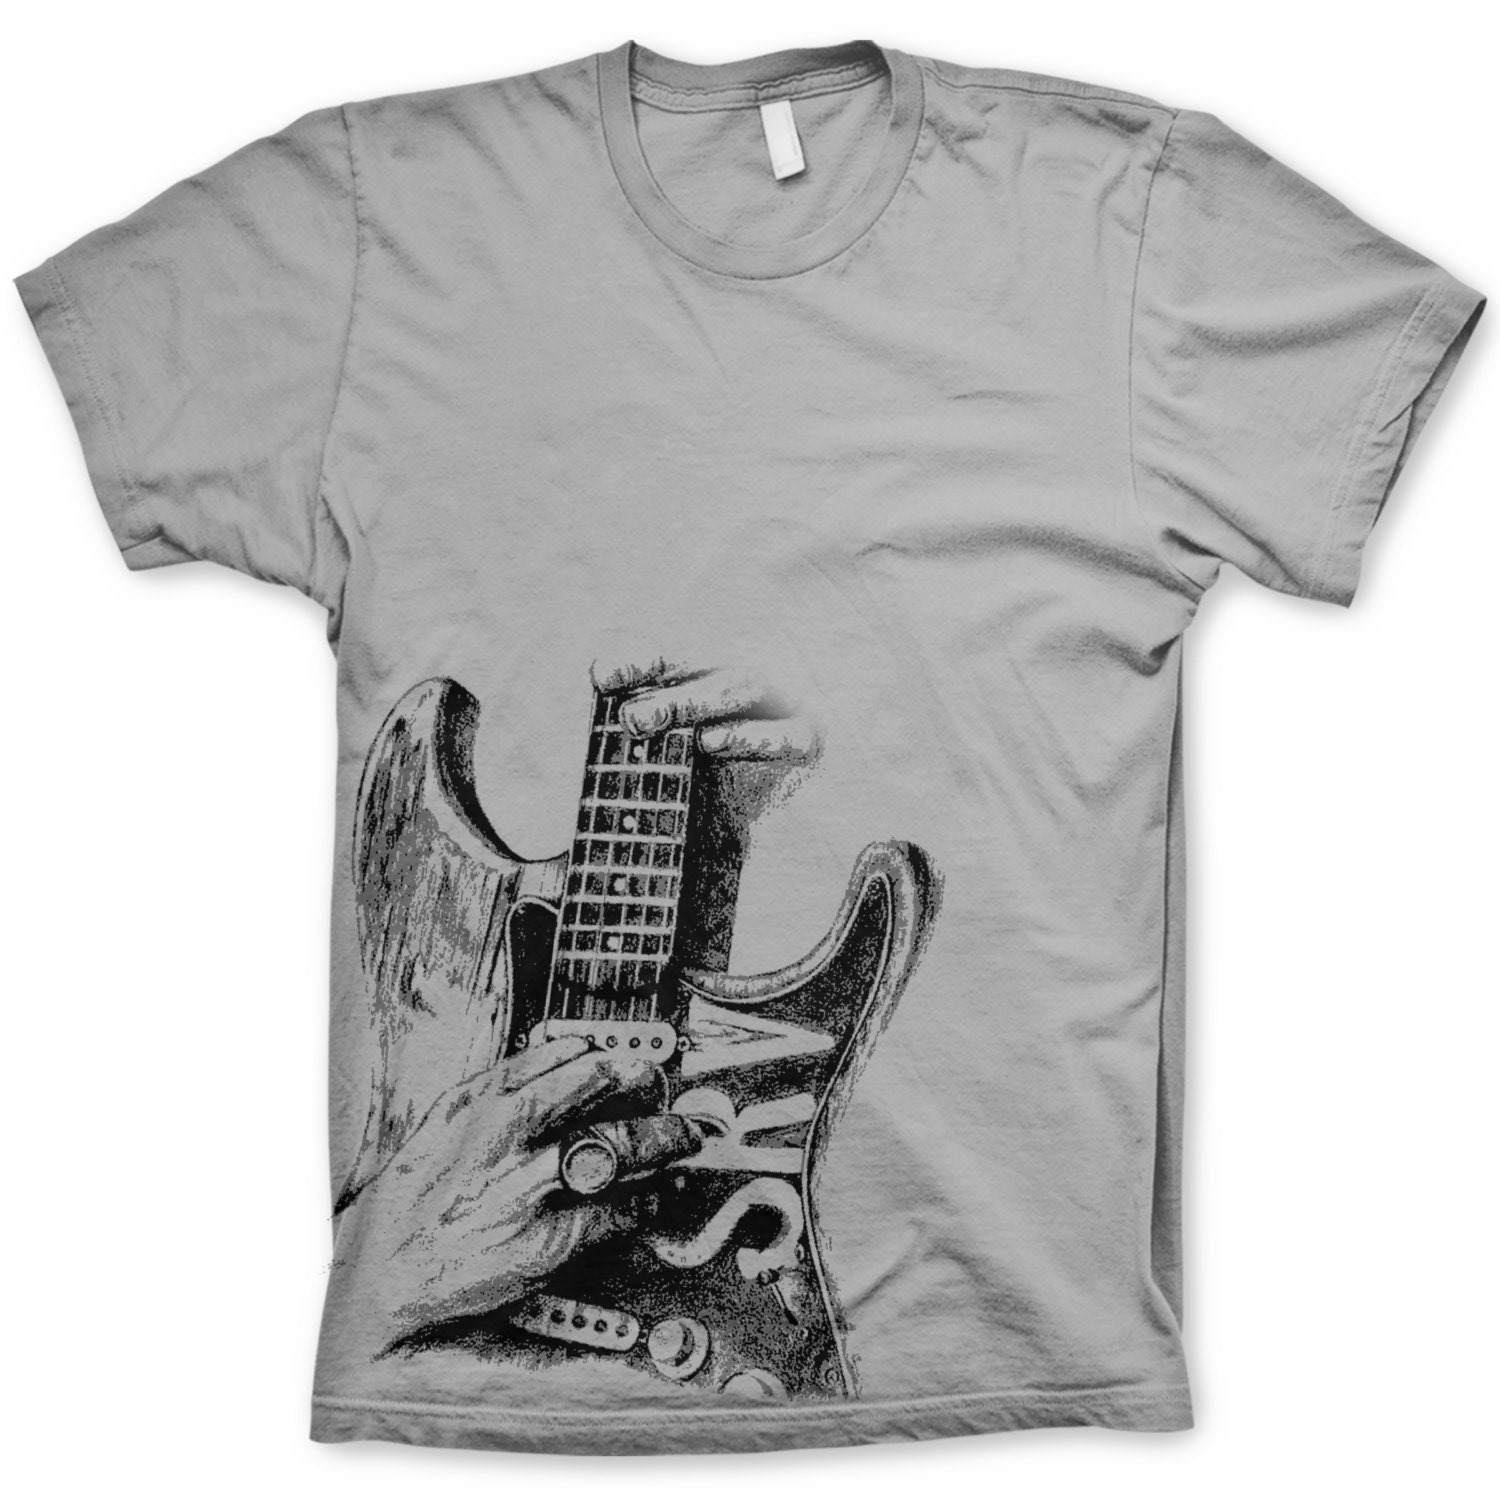 SRV shirt music shirts guitar tees by RocCityTees on Etsy